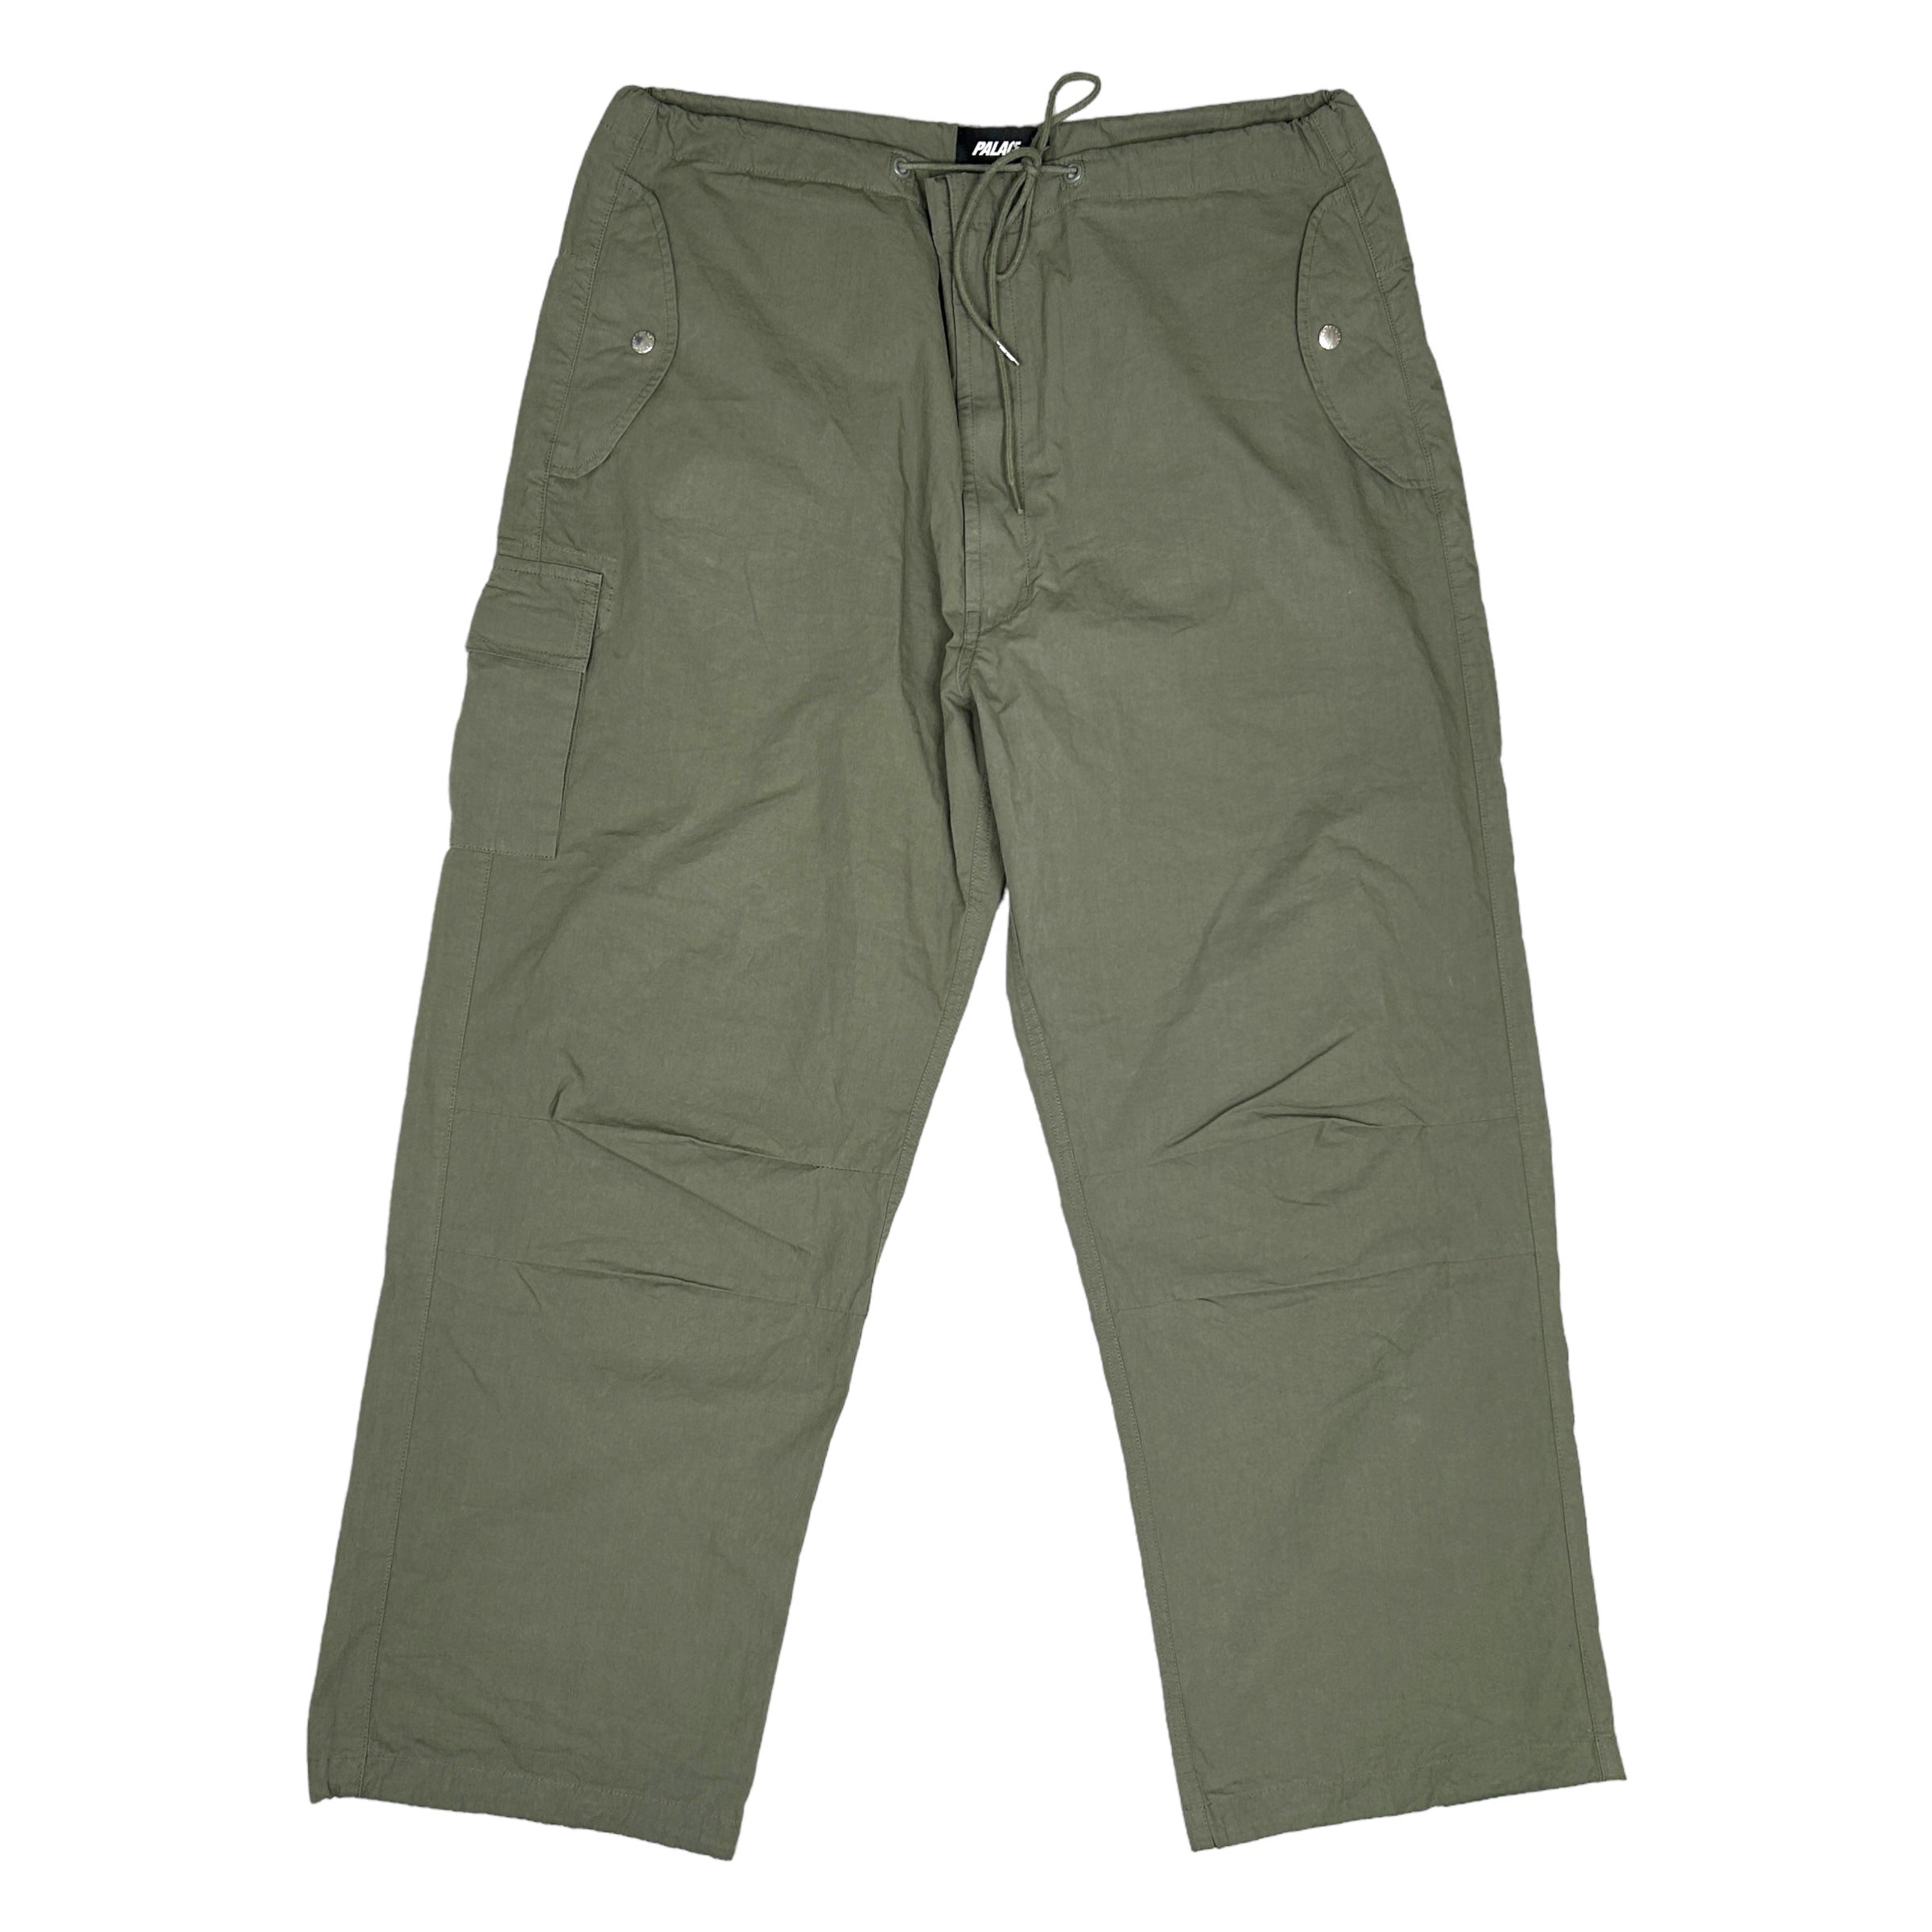 PALACE OVER TROUSERS - OLIVE